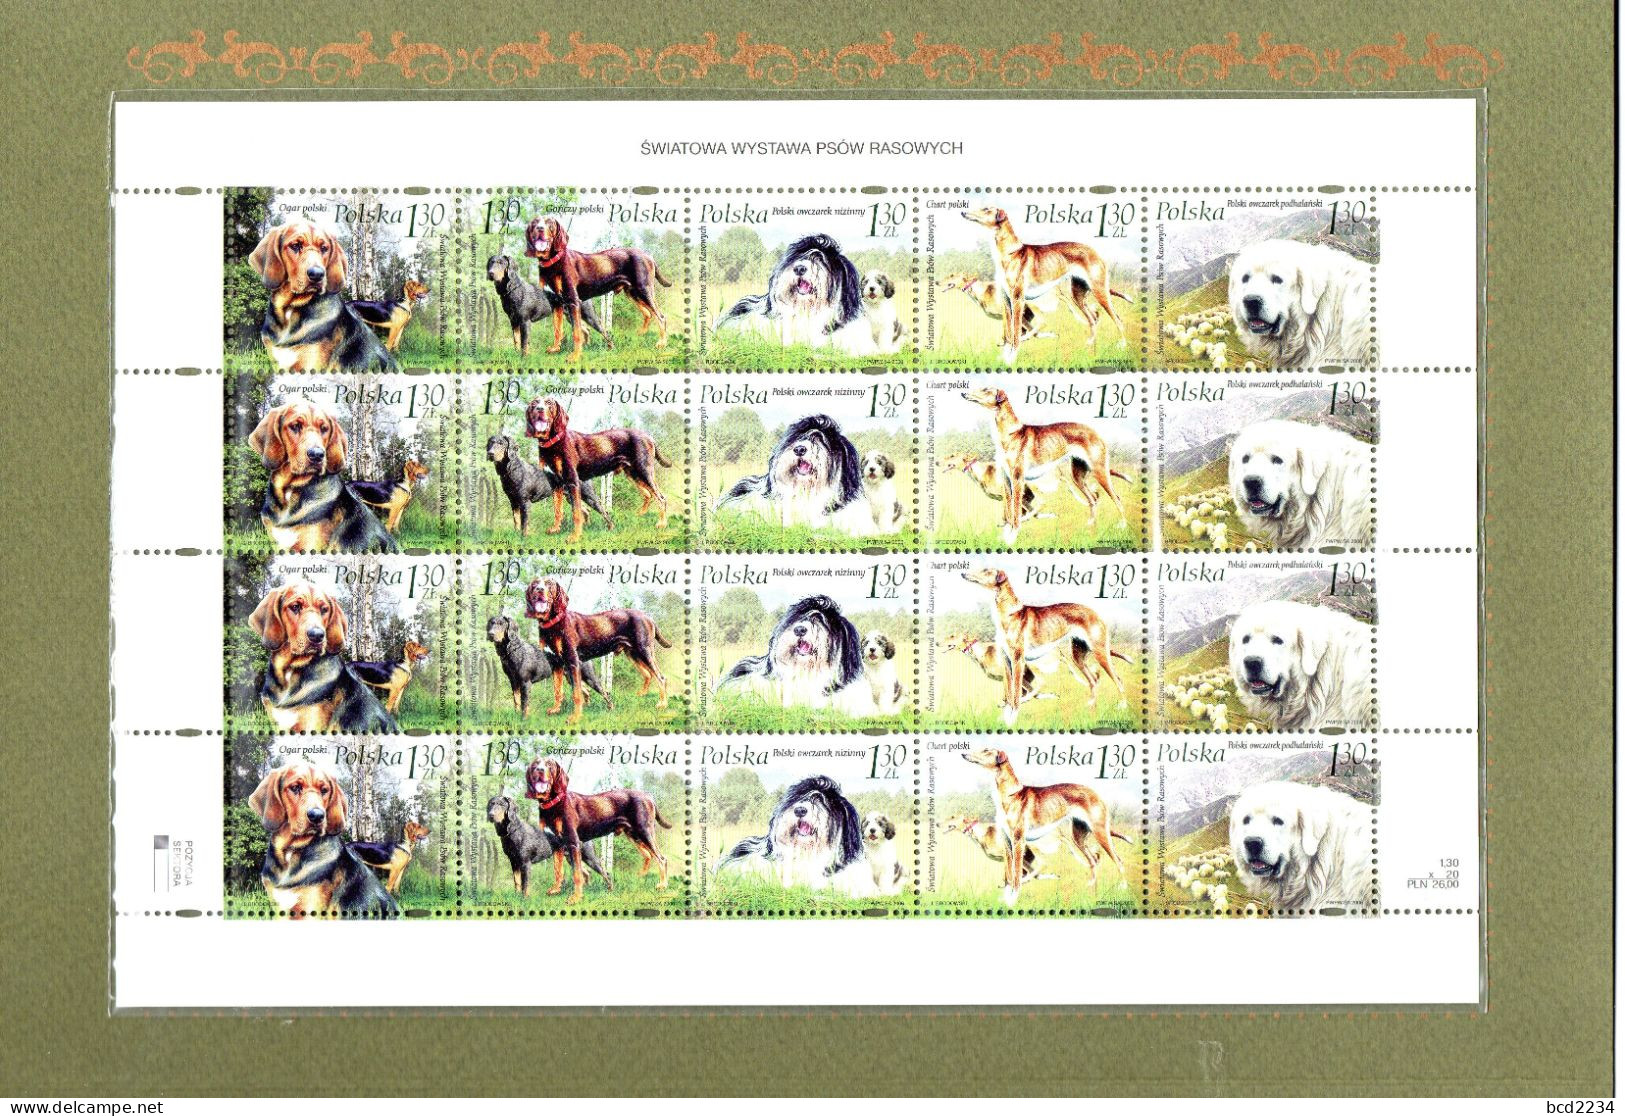 POLAND 2006 RARE POLISH POST OFFICE LIMITED EDITION FOLDER: SHEET OF 20 STAMPS OF WORLD EXHIBITION SHOW PEDIGREE DOGS - Lettres & Documents